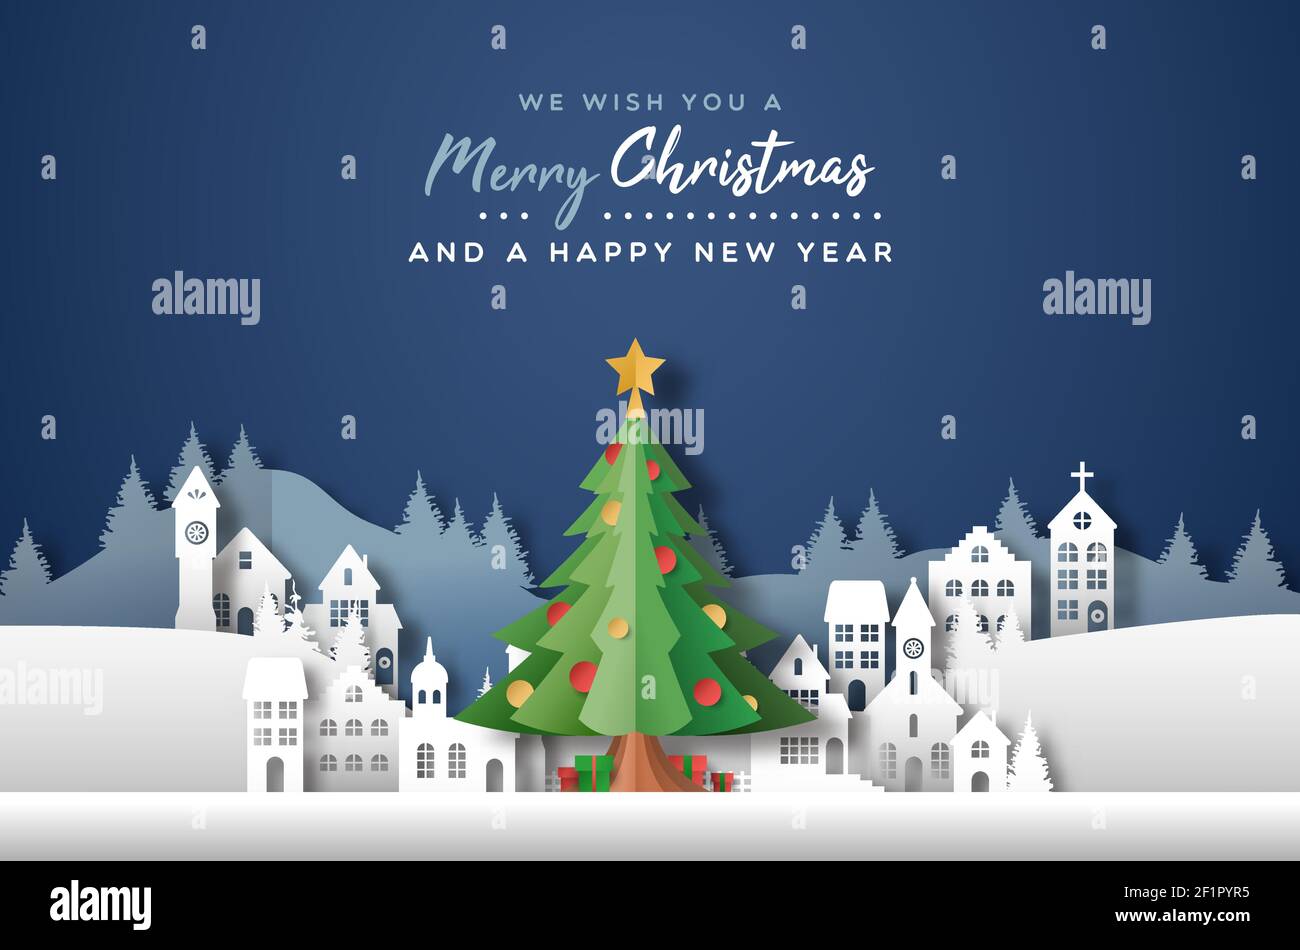 Merry Christmas Happy New Year greeting card illustration of ...